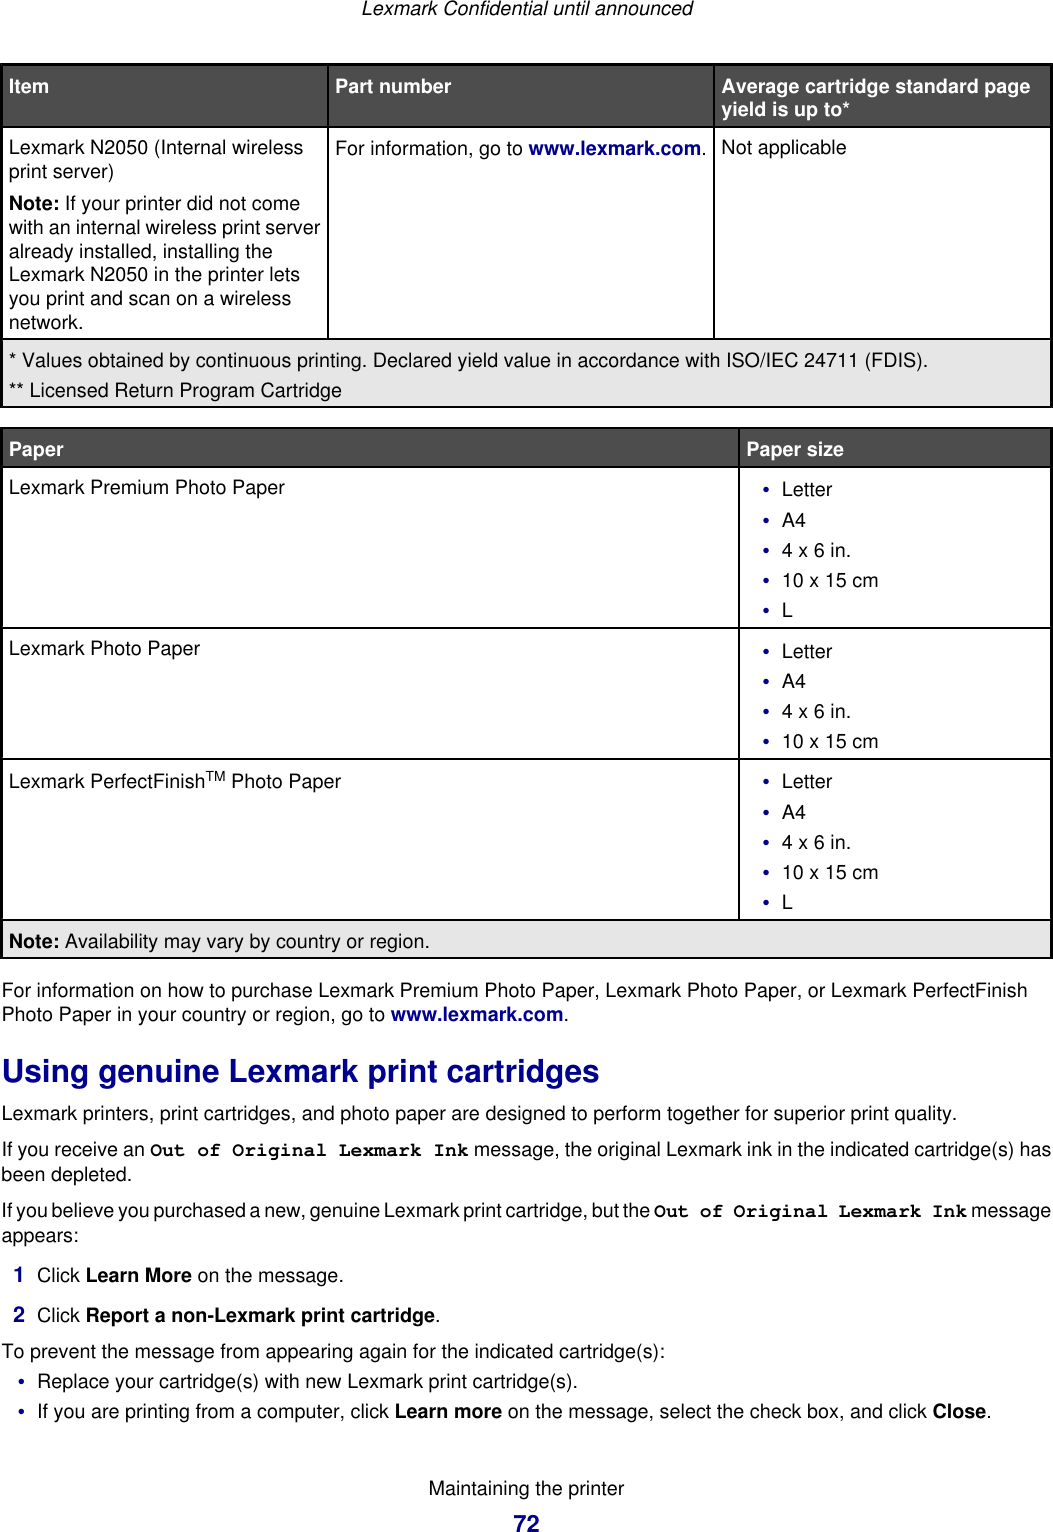 Item Part number Average cartridge standard pageyield is up to*Lexmark N2050 (Internal wirelessprint server)Note: If your printer did not comewith an internal wireless print serveralready installed, installing theLexmark N2050 in the printer letsyou print and scan on a wirelessnetwork.For information, go to www.lexmark.com.Not applicable* Values obtained by continuous printing. Declared yield value in accordance with ISO/IEC 24711 (FDIS).** Licensed Return Program CartridgePaper Paper sizeLexmark Premium Photo Paper •Letter•A4•4 x 6 in.•10 x 15 cm•LLexmark Photo Paper •Letter•A4•4 x 6 in.•10 x 15 cmLexmark PerfectFinishTM Photo Paper •Letter•A4•4 x 6 in.•10 x 15 cm•LNote: Availability may vary by country or region.For information on how to purchase Lexmark Premium Photo Paper, Lexmark Photo Paper, or Lexmark PerfectFinishPhoto Paper in your country or region, go to www.lexmark.com.Using genuine Lexmark print cartridgesLexmark printers, print cartridges, and photo paper are designed to perform together for superior print quality.If you receive an Out of Original Lexmark Ink message, the original Lexmark ink in the indicated cartridge(s) hasbeen depleted.If you believe you purchased a new, genuine Lexmark print cartridge, but the Out of Original Lexmark Ink messageappears:1Click Learn More on the message.2Click Report a non-Lexmark print cartridge.To prevent the message from appearing again for the indicated cartridge(s):•Replace your cartridge(s) with new Lexmark print cartridge(s).•If you are printing from a computer, click Learn more on the message, select the check box, and click Close.Lexmark Confidential until announcedMaintaining the printer72